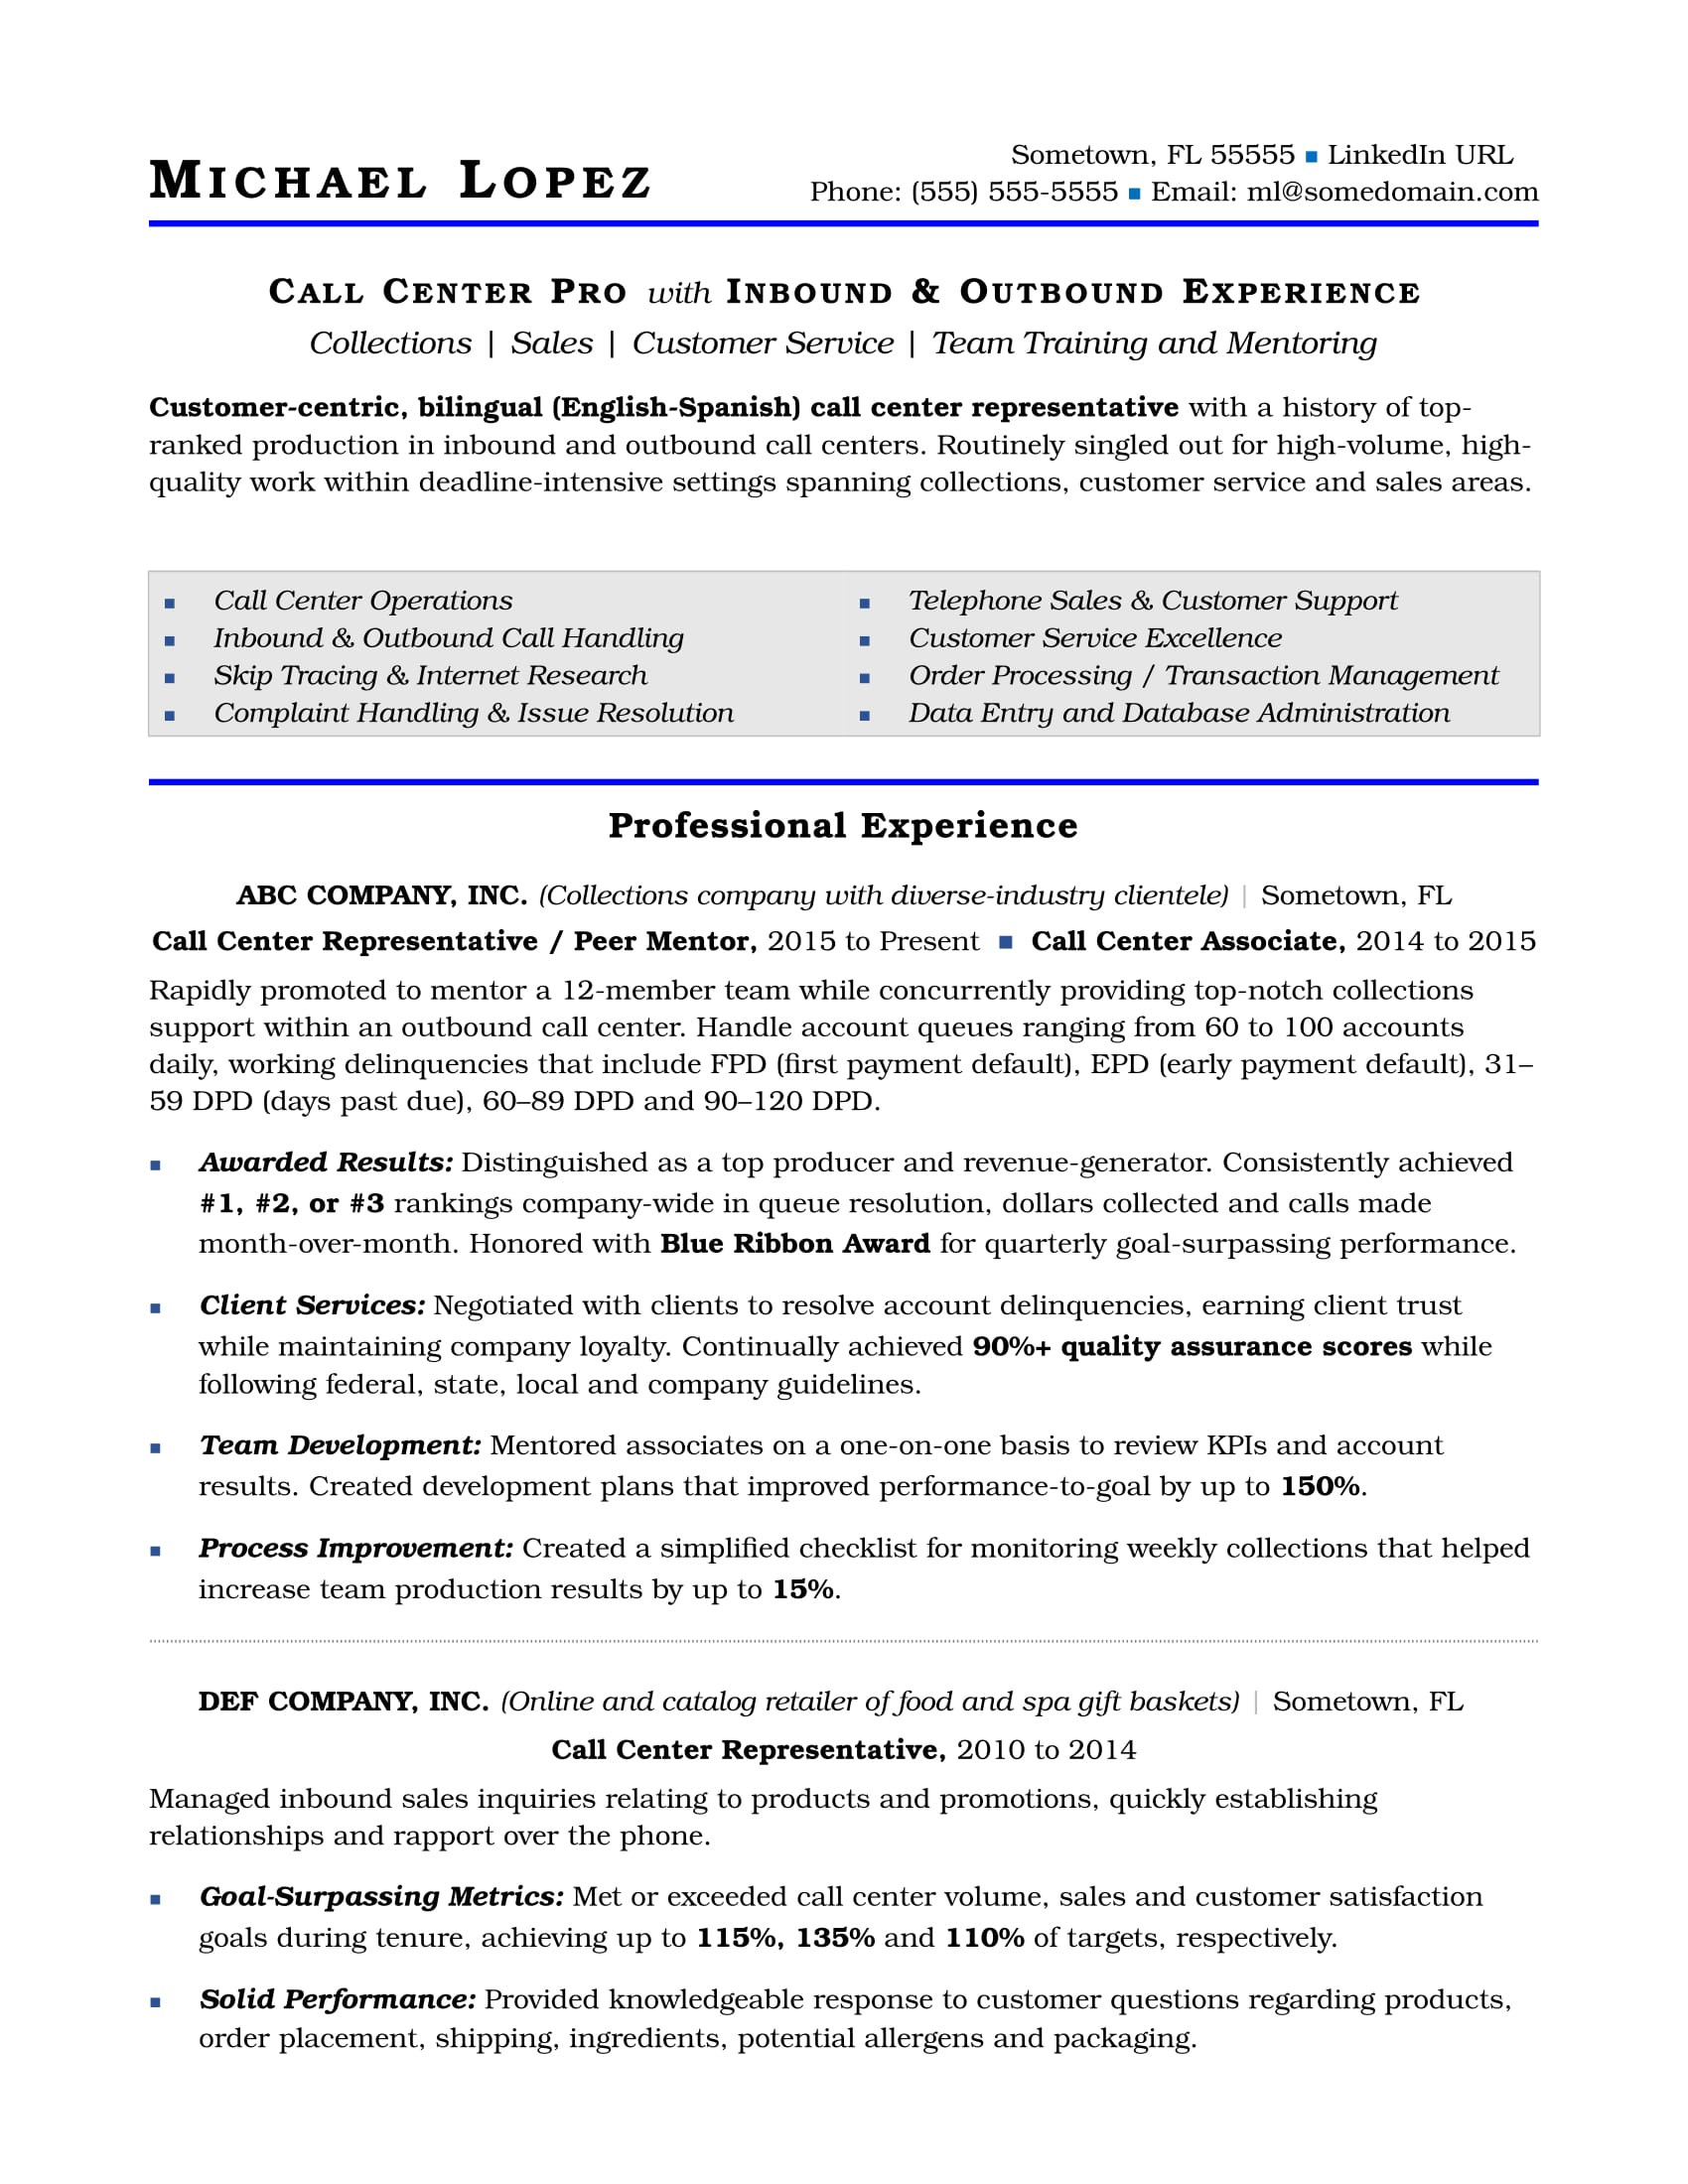 Sample Resume for Call Center Agent with Experience Call Center Resume Sample